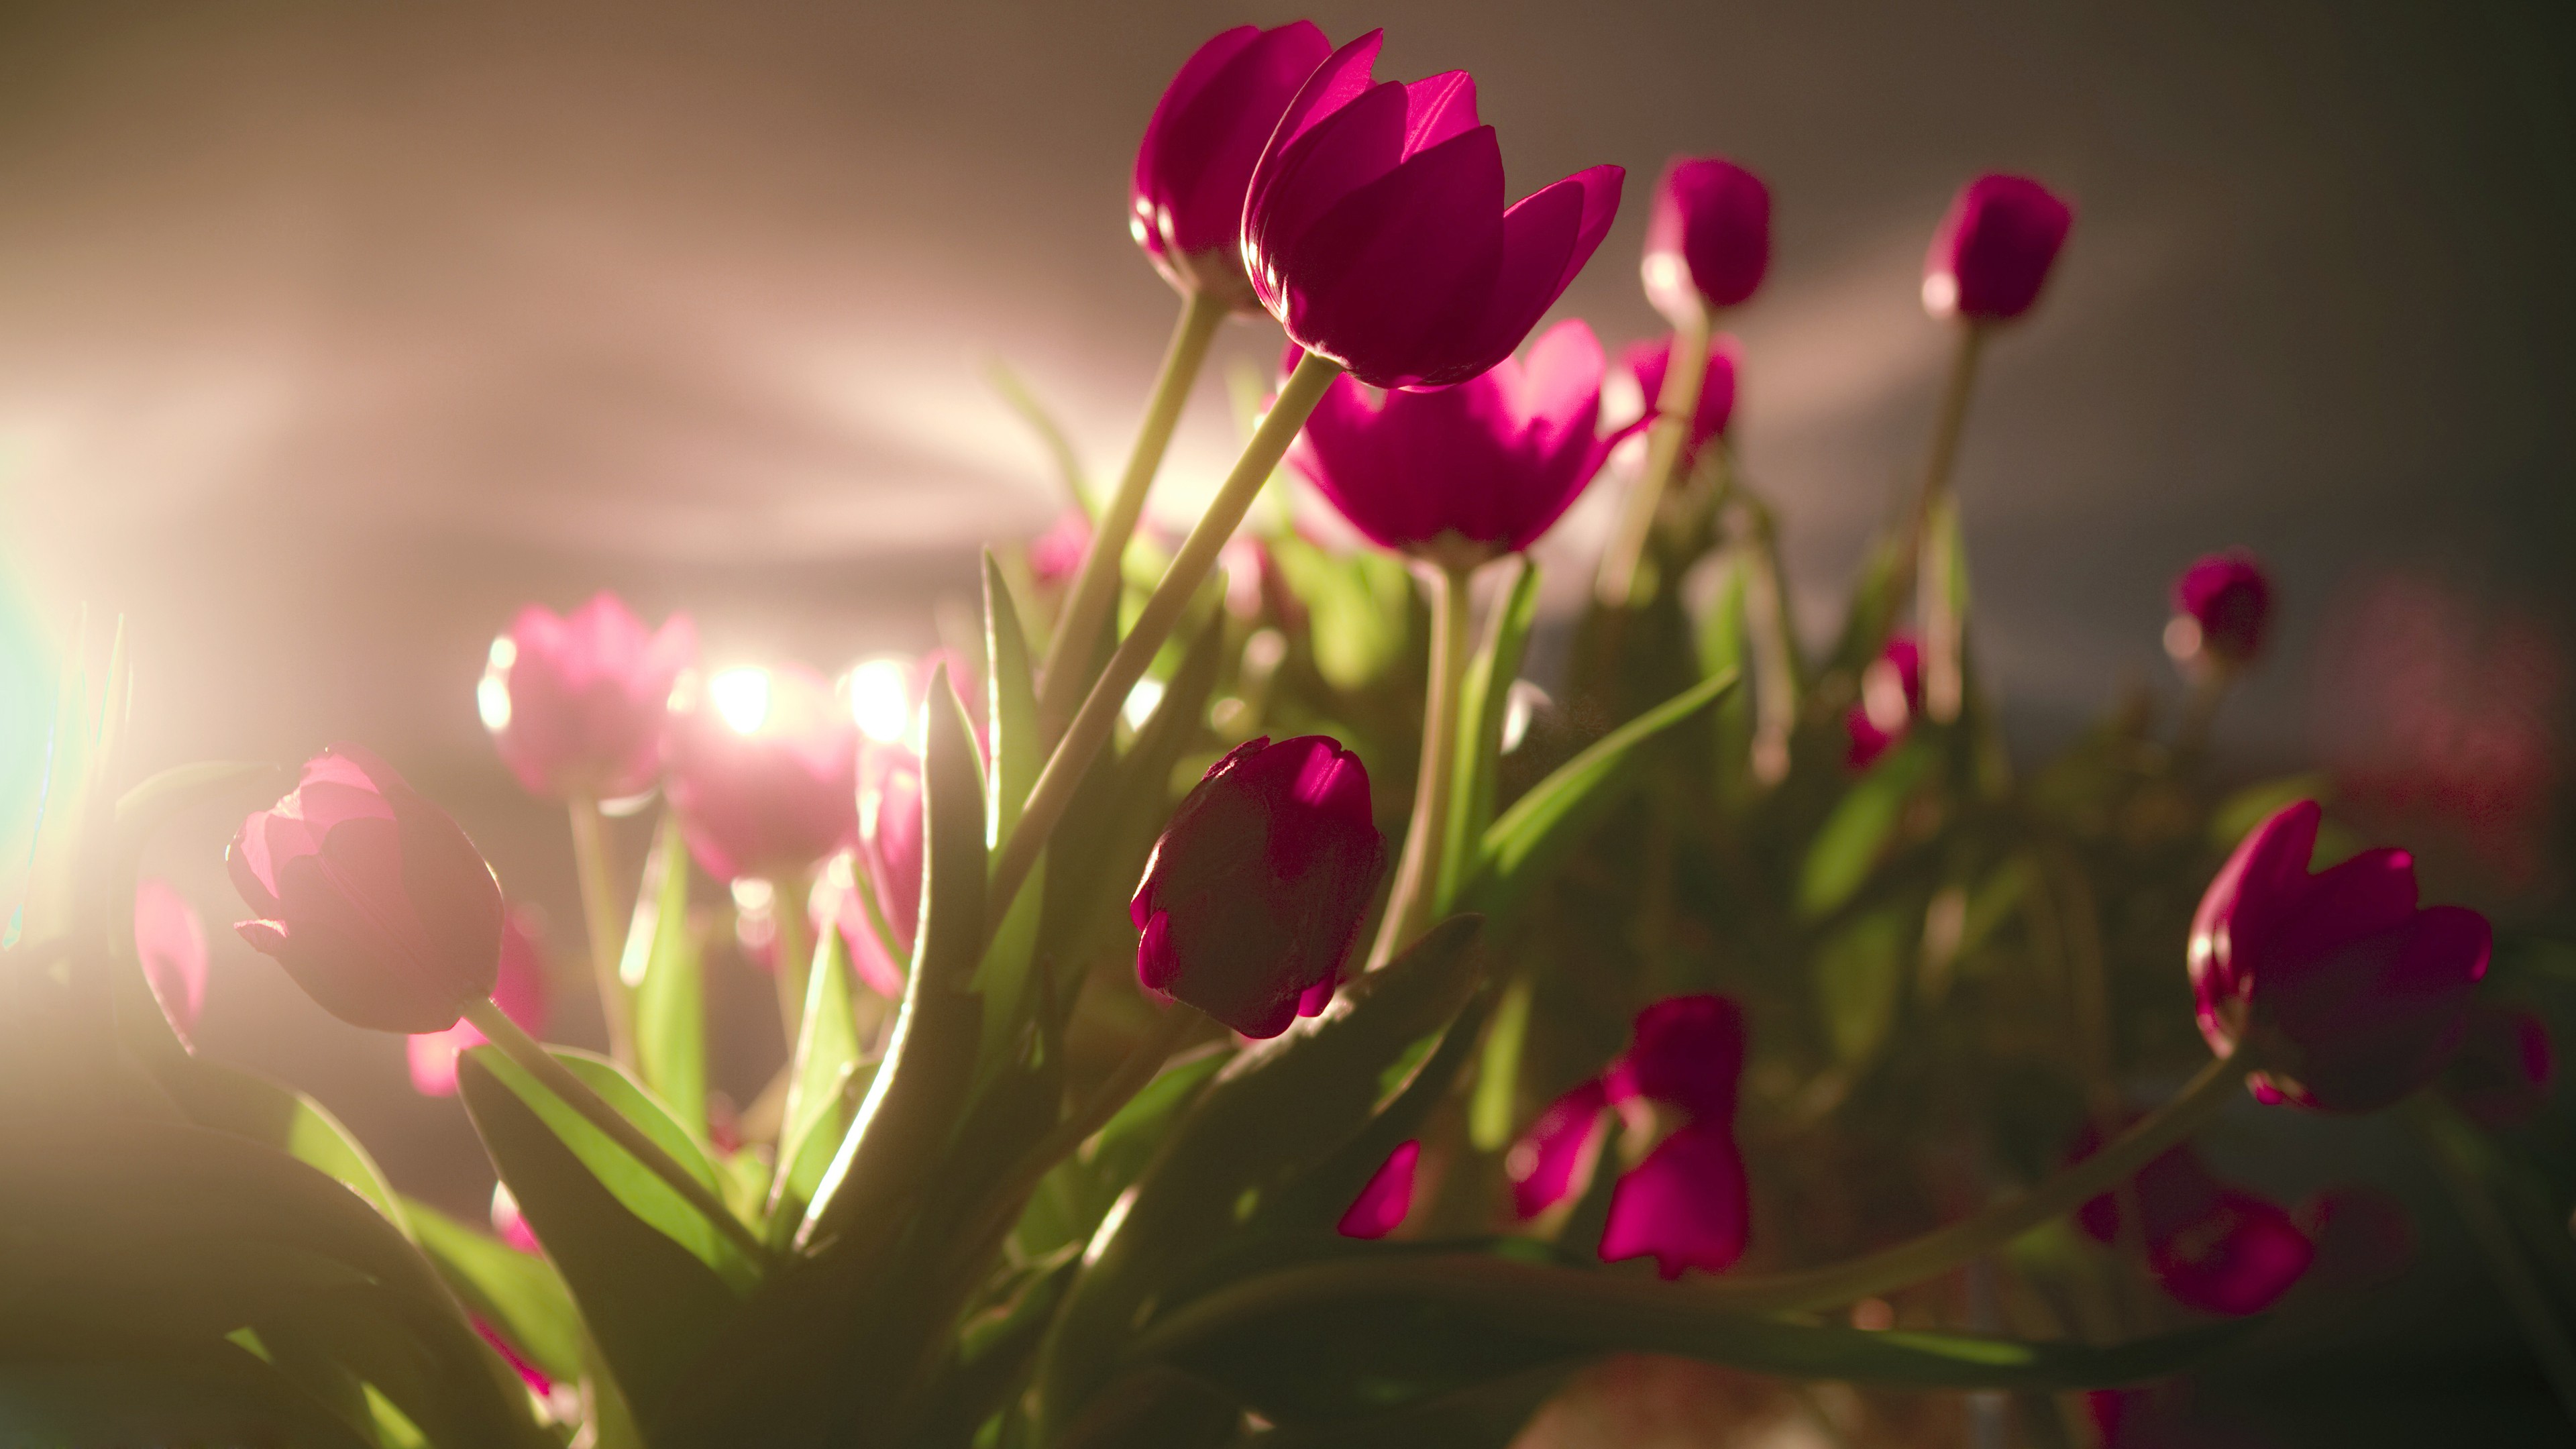 Free Flowers Art Without Copyright - Tulip Flowers Images Hd - HD Wallpaper 